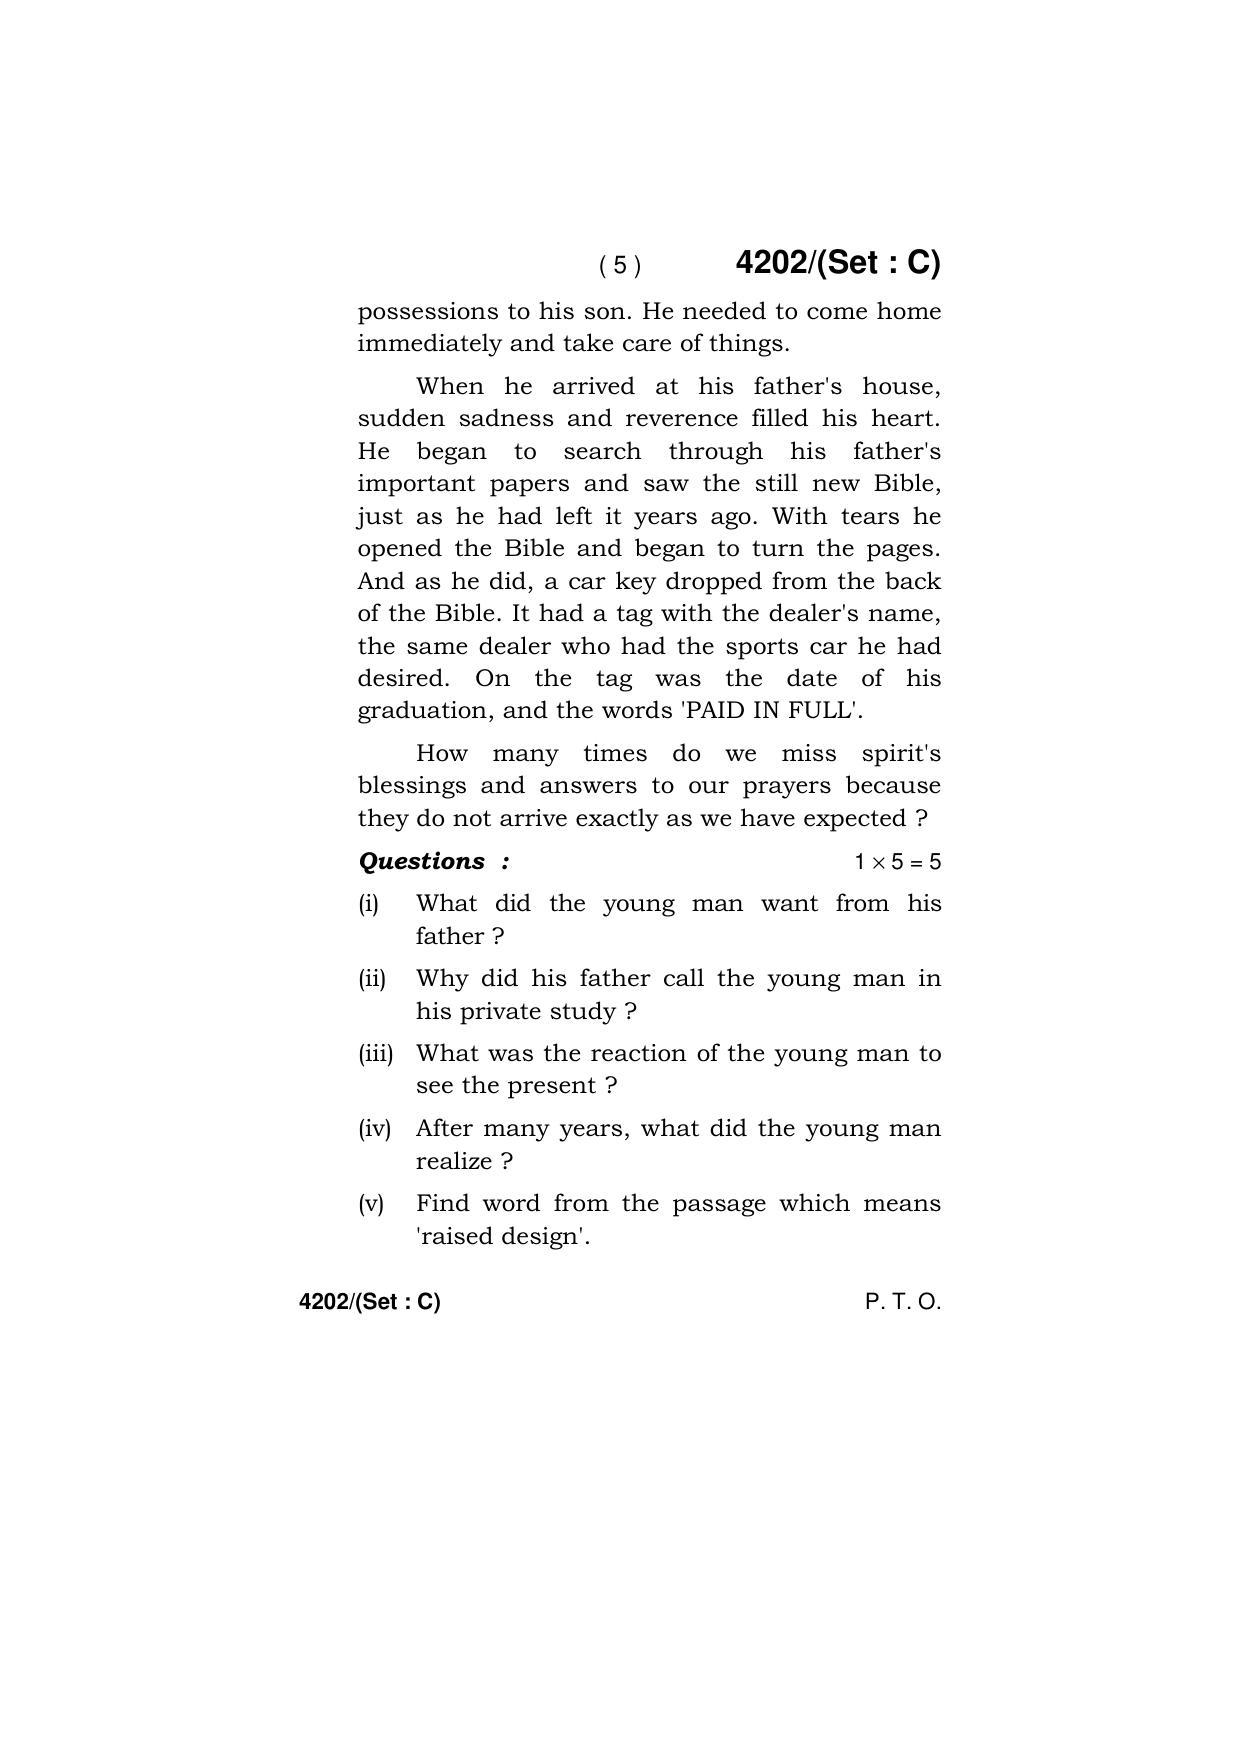 Haryana Board HBSE Class 10 English (All Set) 2019 Question Paper - Page 37